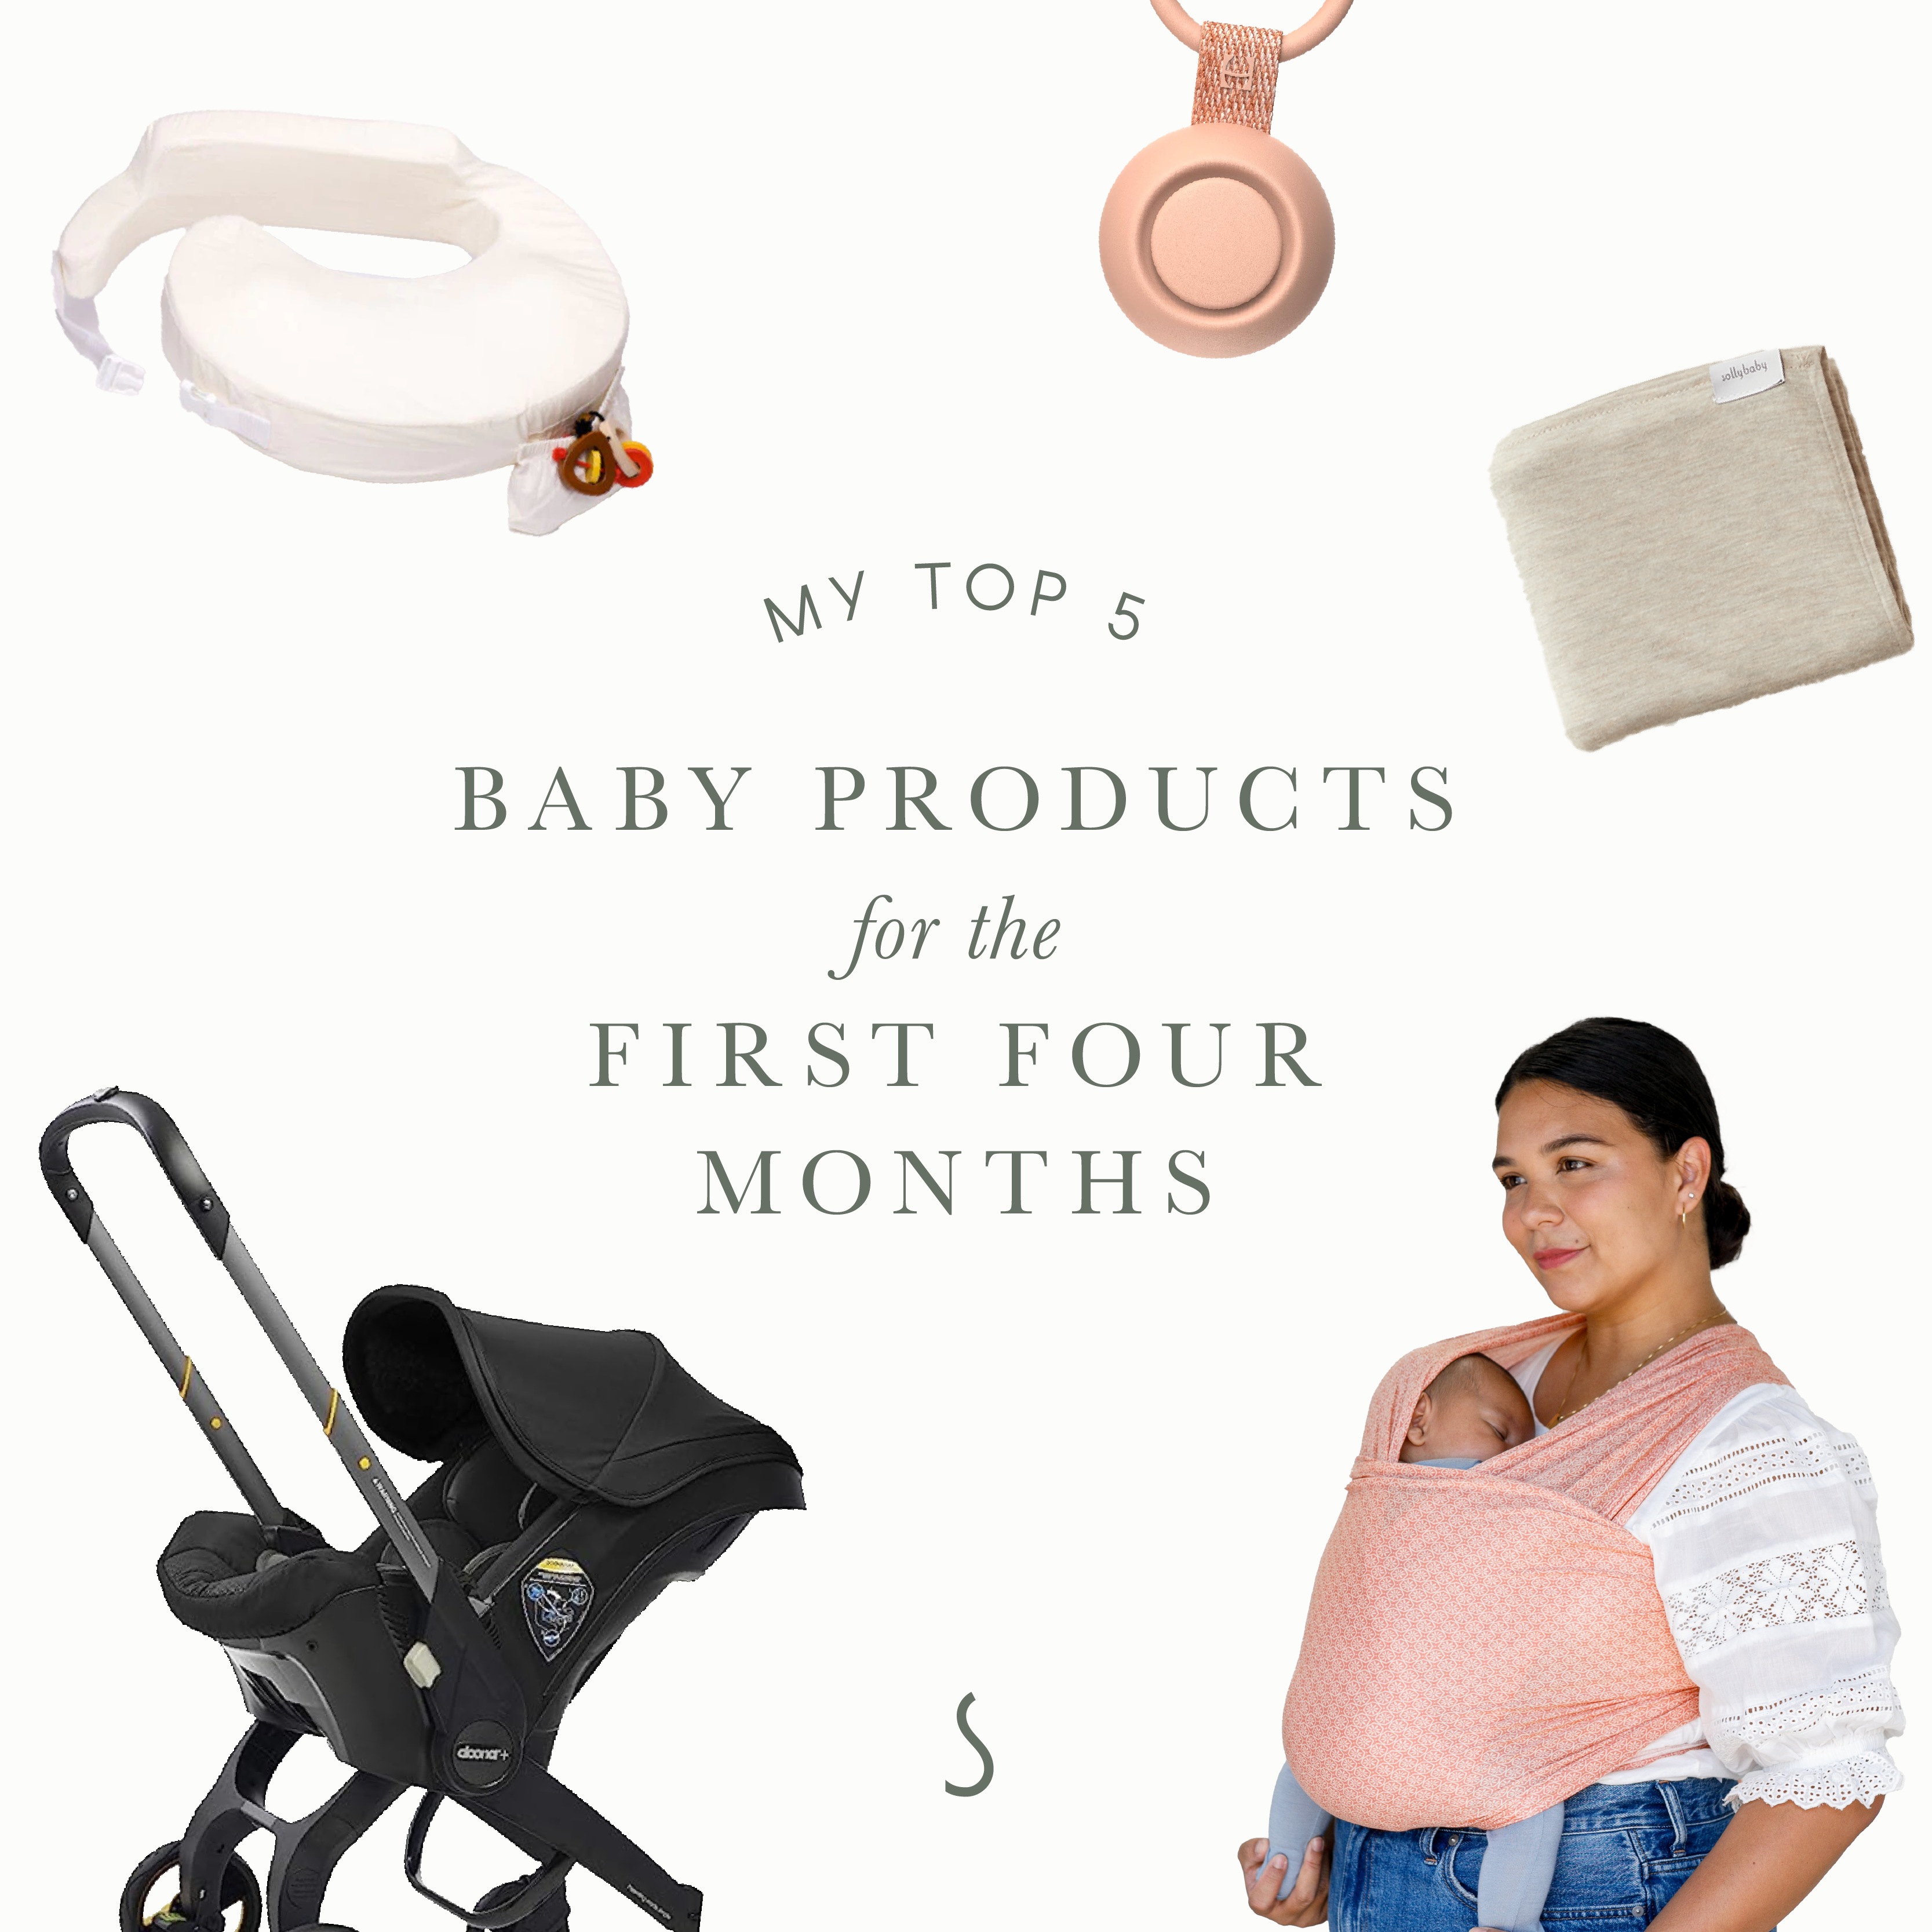 My Top 5 Baby Products for the First Four Months